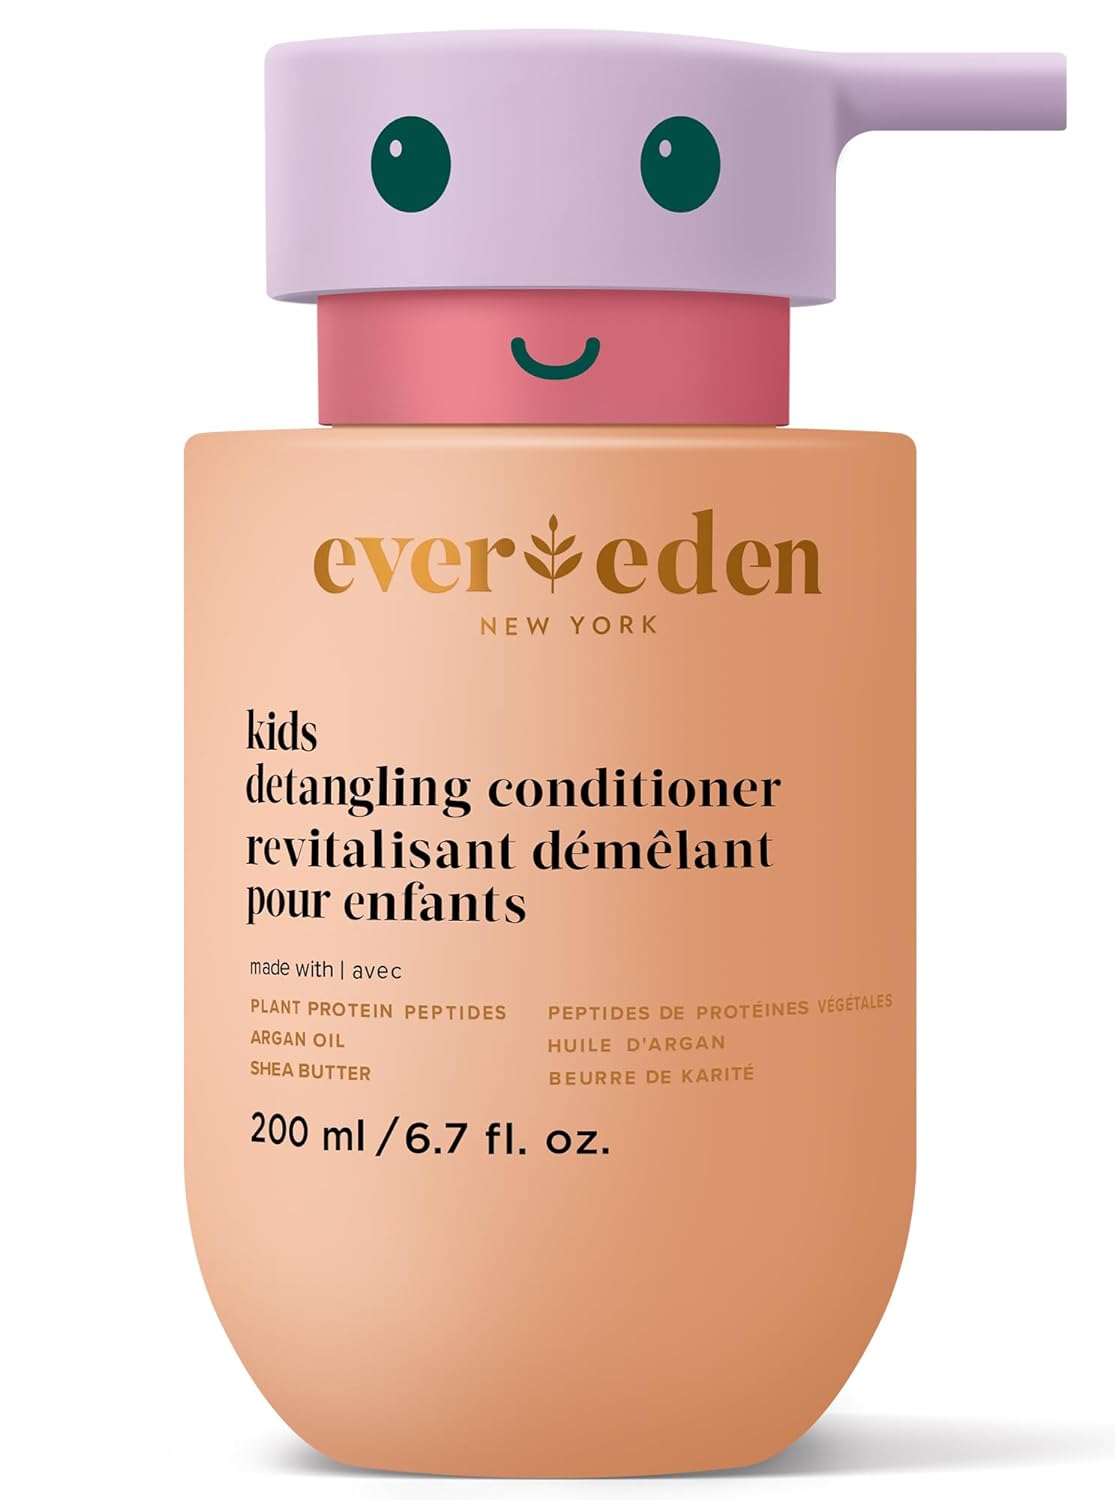 Evereden Kids Conditioner Detangler, 6.7 fl oz. | Plant Based Kids Haircare | Made With Clean and Non-toxic Ingredients | Natural Conditioner for Kids